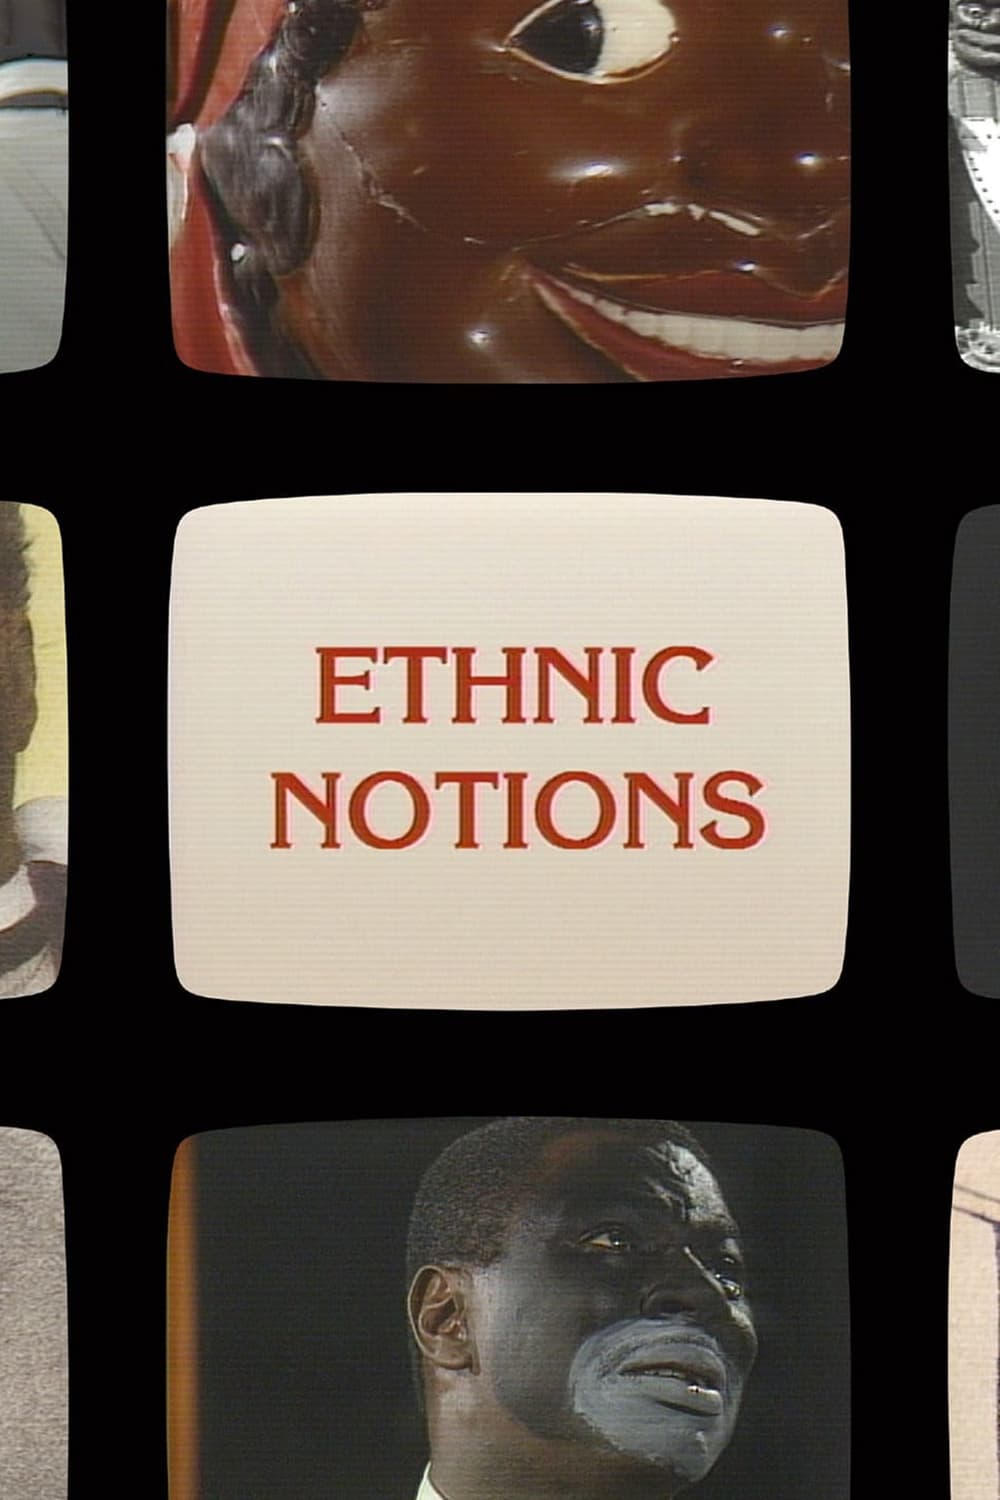 ethnic notions documentary download torrent